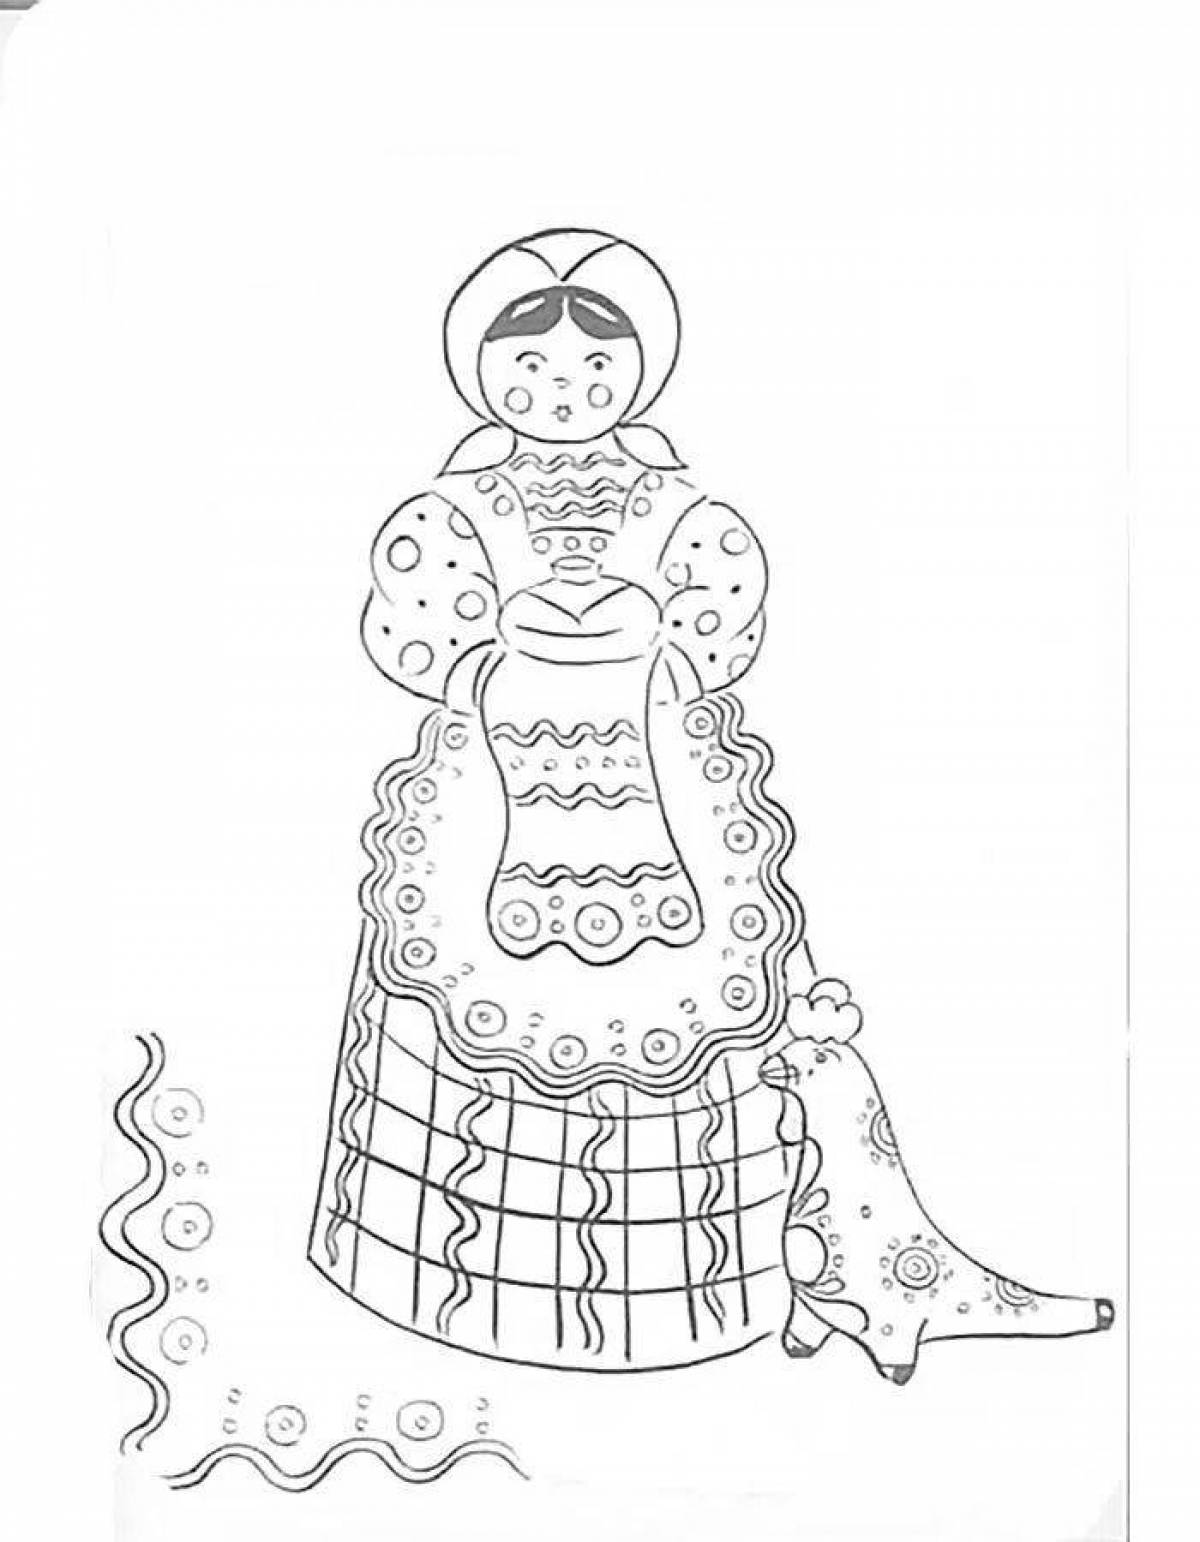 Delightful Dymkovo lady coloring book for kids